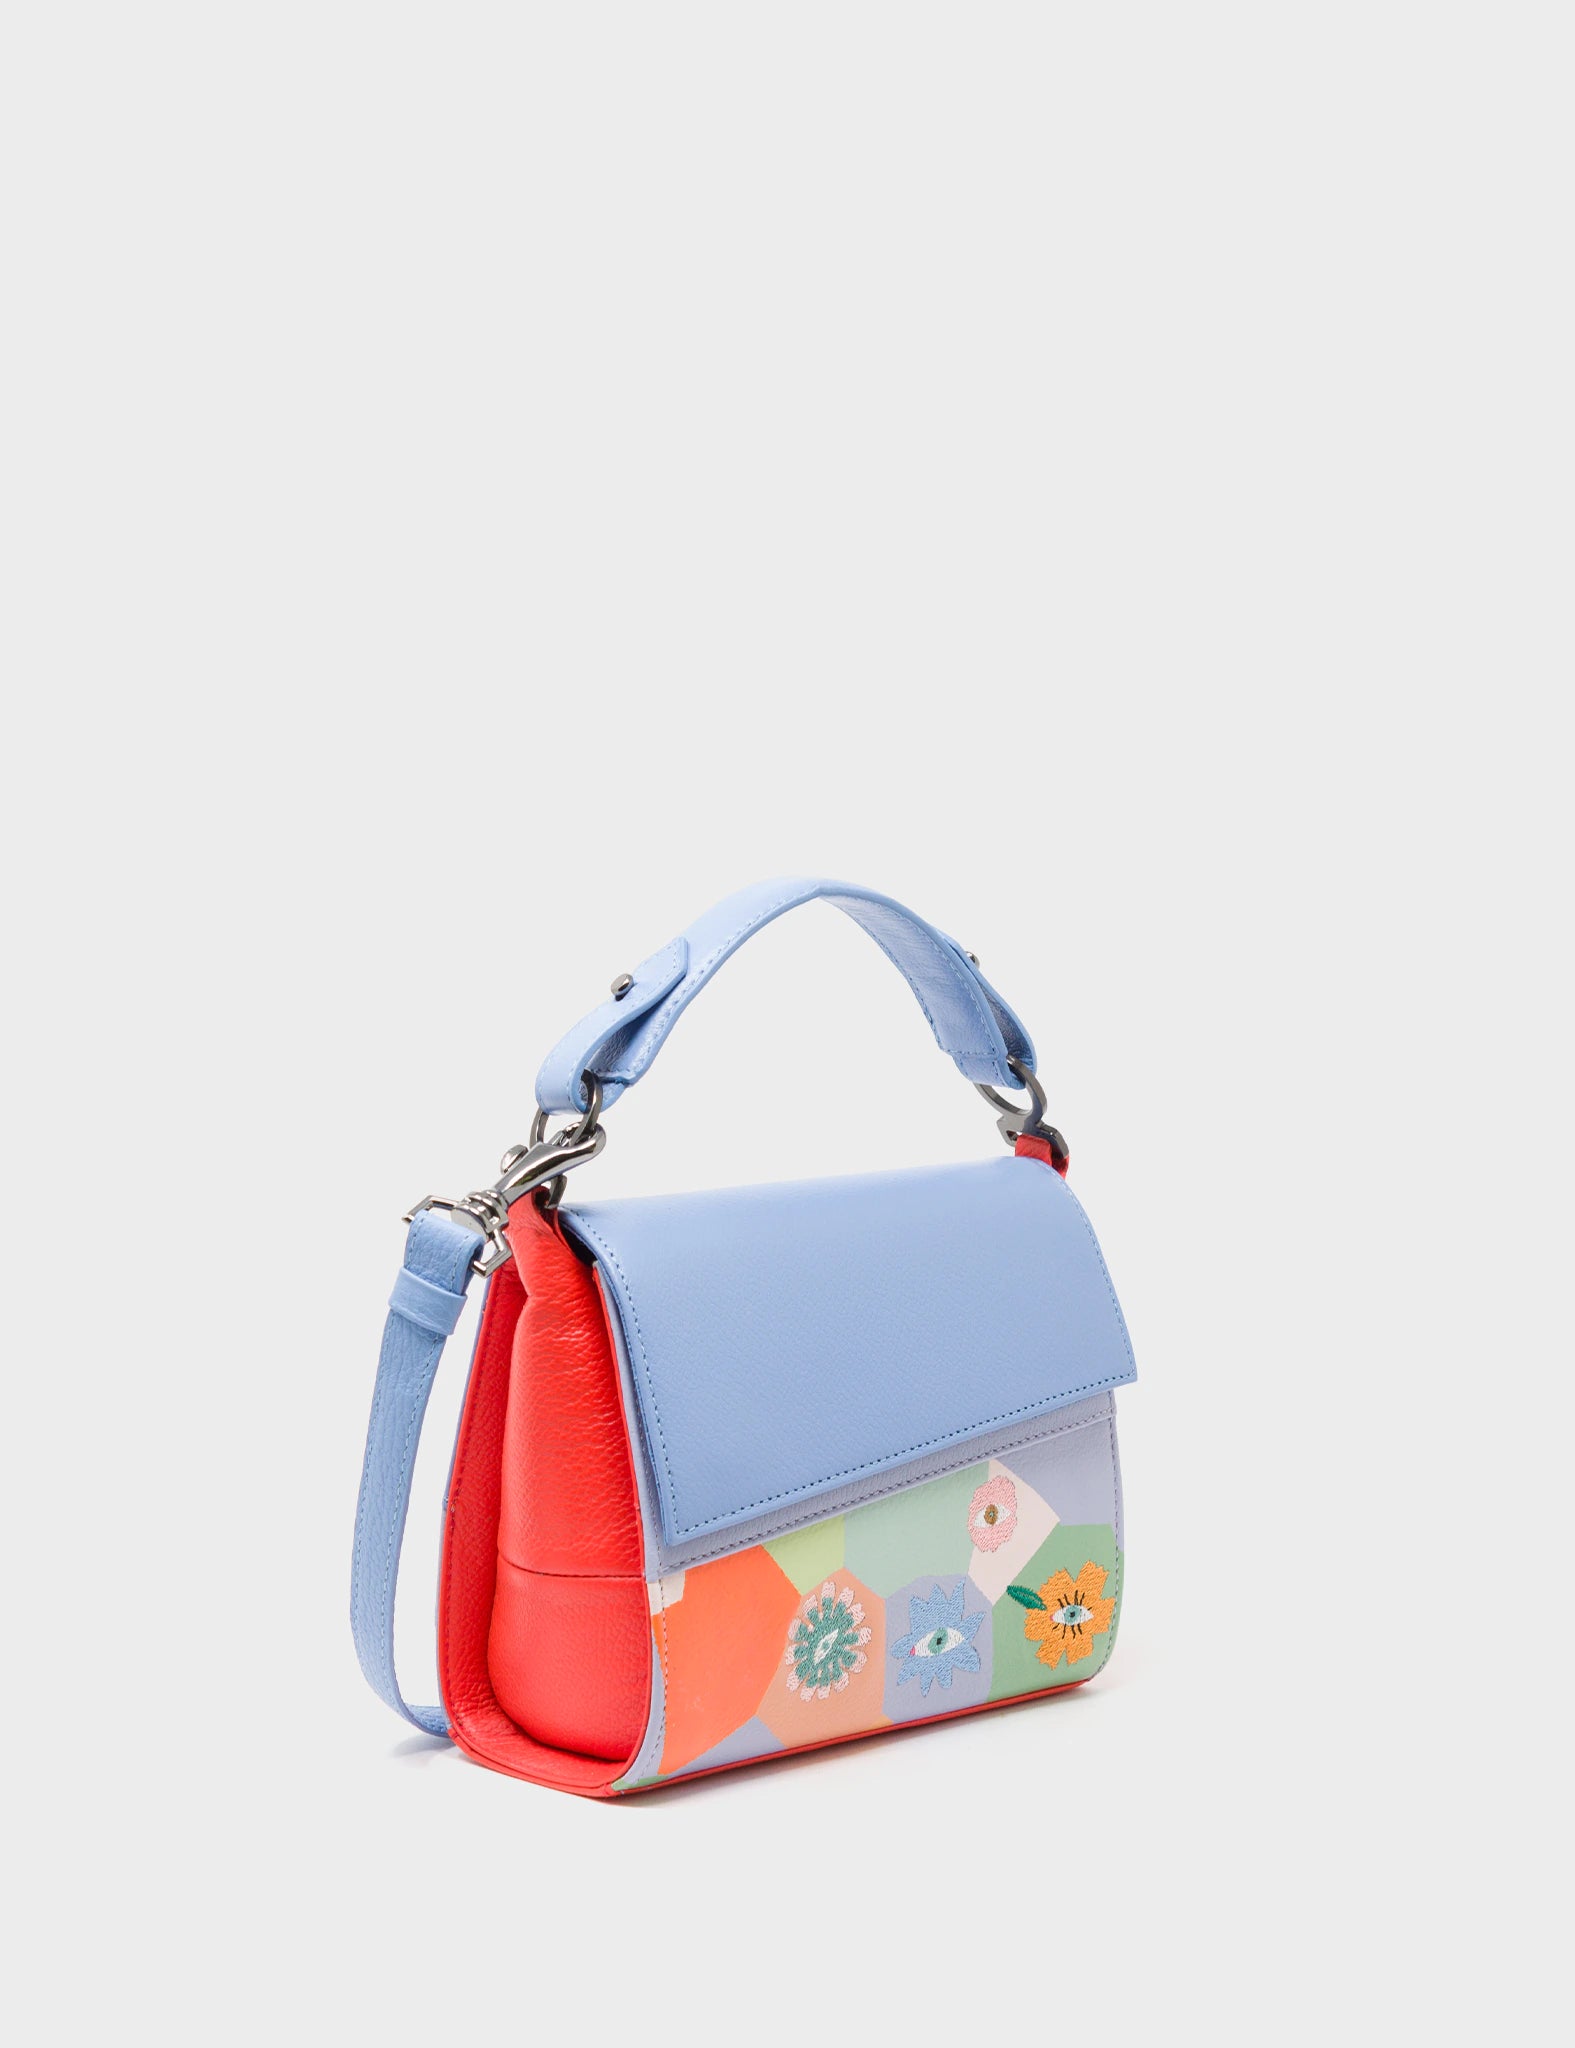 Micro Crossbody Handbag Blue and Red Leather - Camouflaged and flowers Embroidery